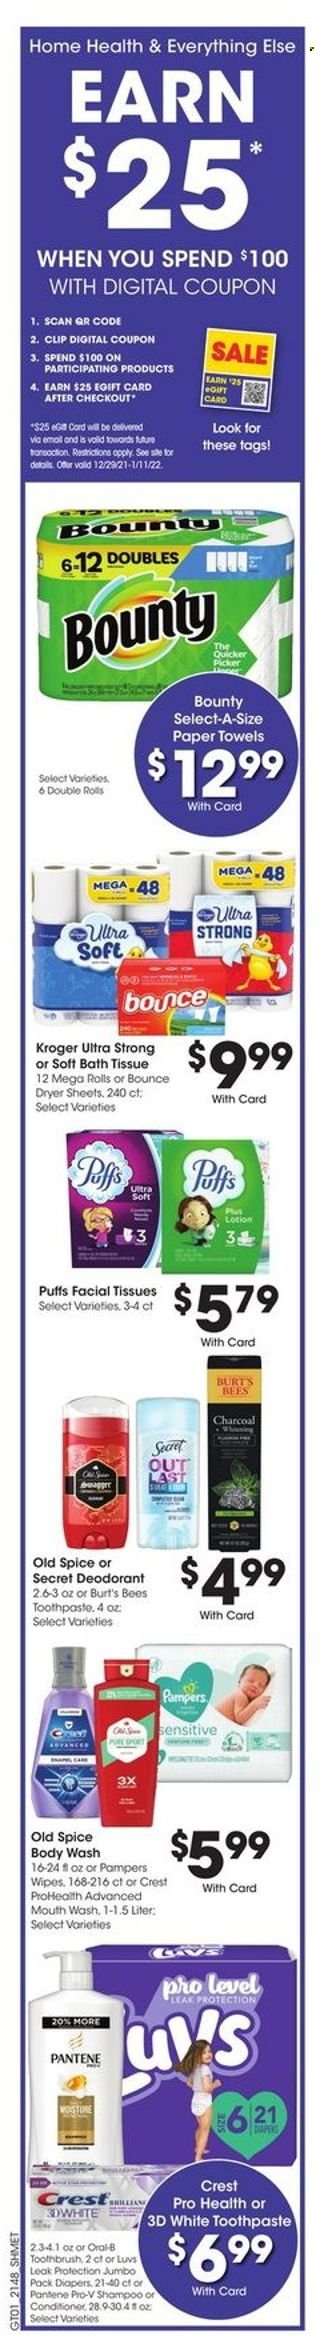 thumbnail - Kroger Flyer - 12/29/2021 - 01/04/2022 - Sales products - puffs, Bounty, spice, wipes, Pampers, bath tissue, kitchen towels, paper towels, Bounce, dryer sheets, body wash, shampoo, Old Spice, toothbrush, Oral-B, toothpaste, Crest, facial tissues, conditioner, Pantene, body lotion, anti-perspirant, deodorant, cup, charcoal. Page 12.